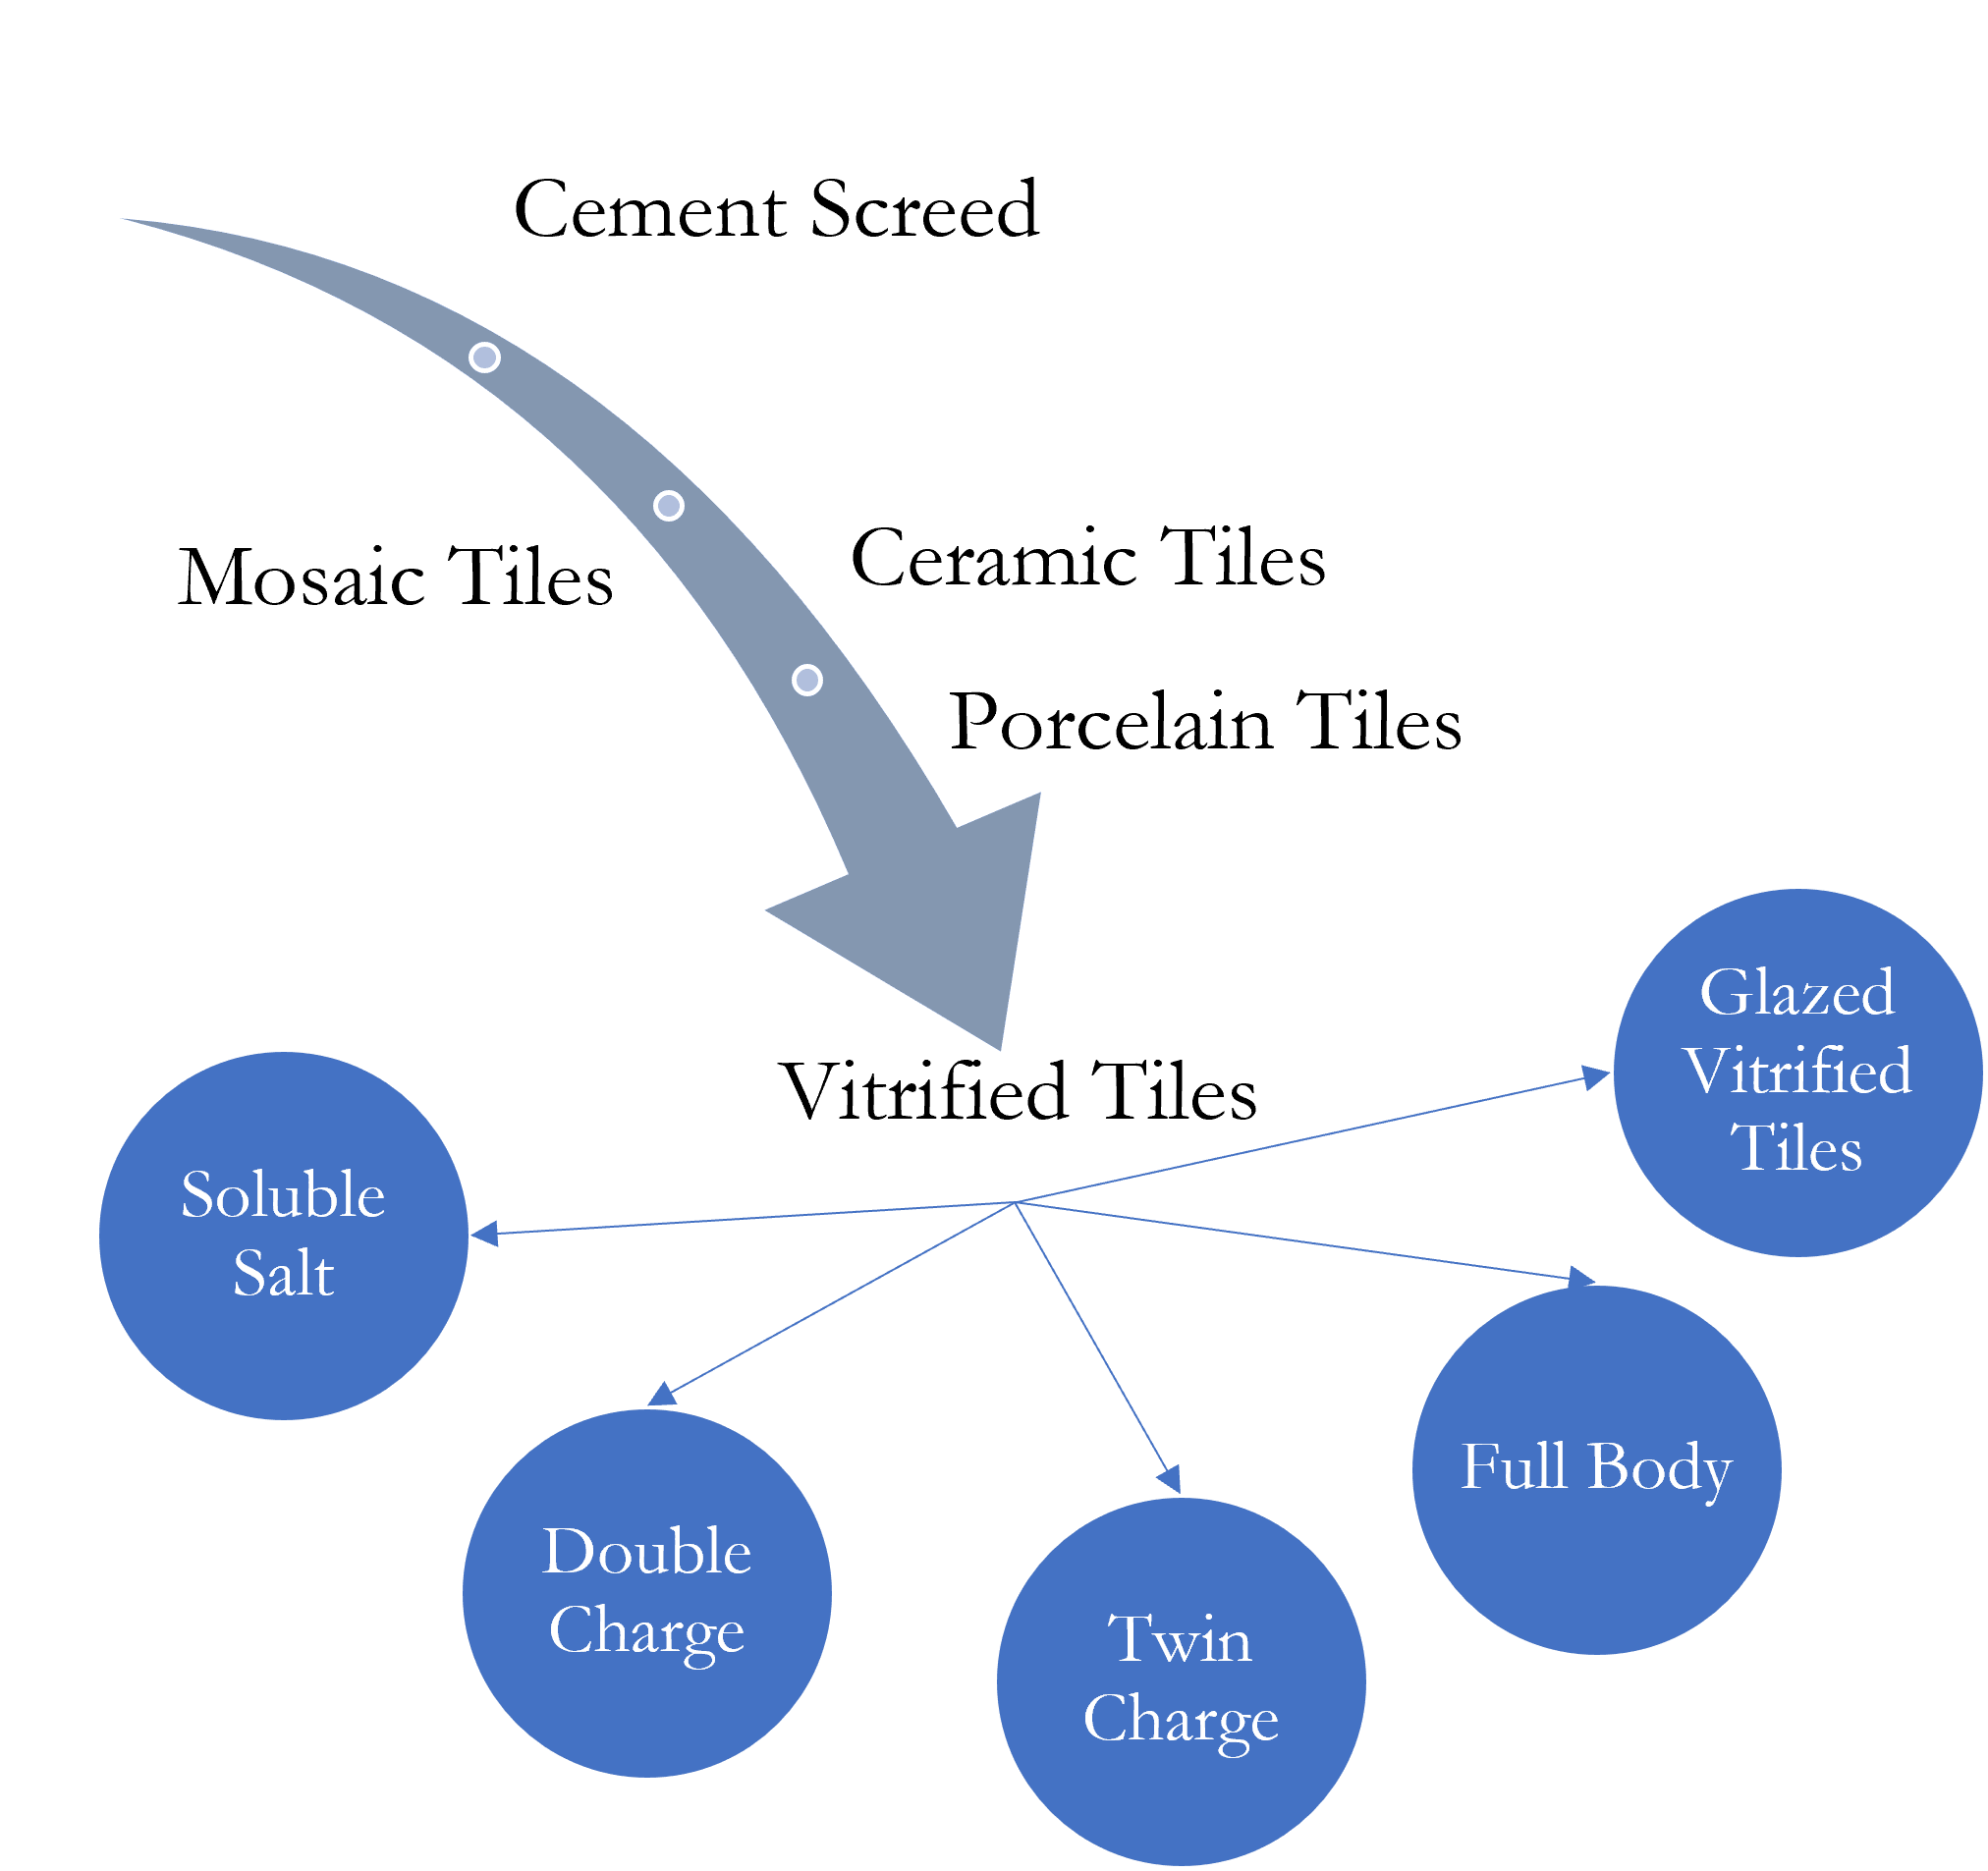 Vitrified tile classification and use cases